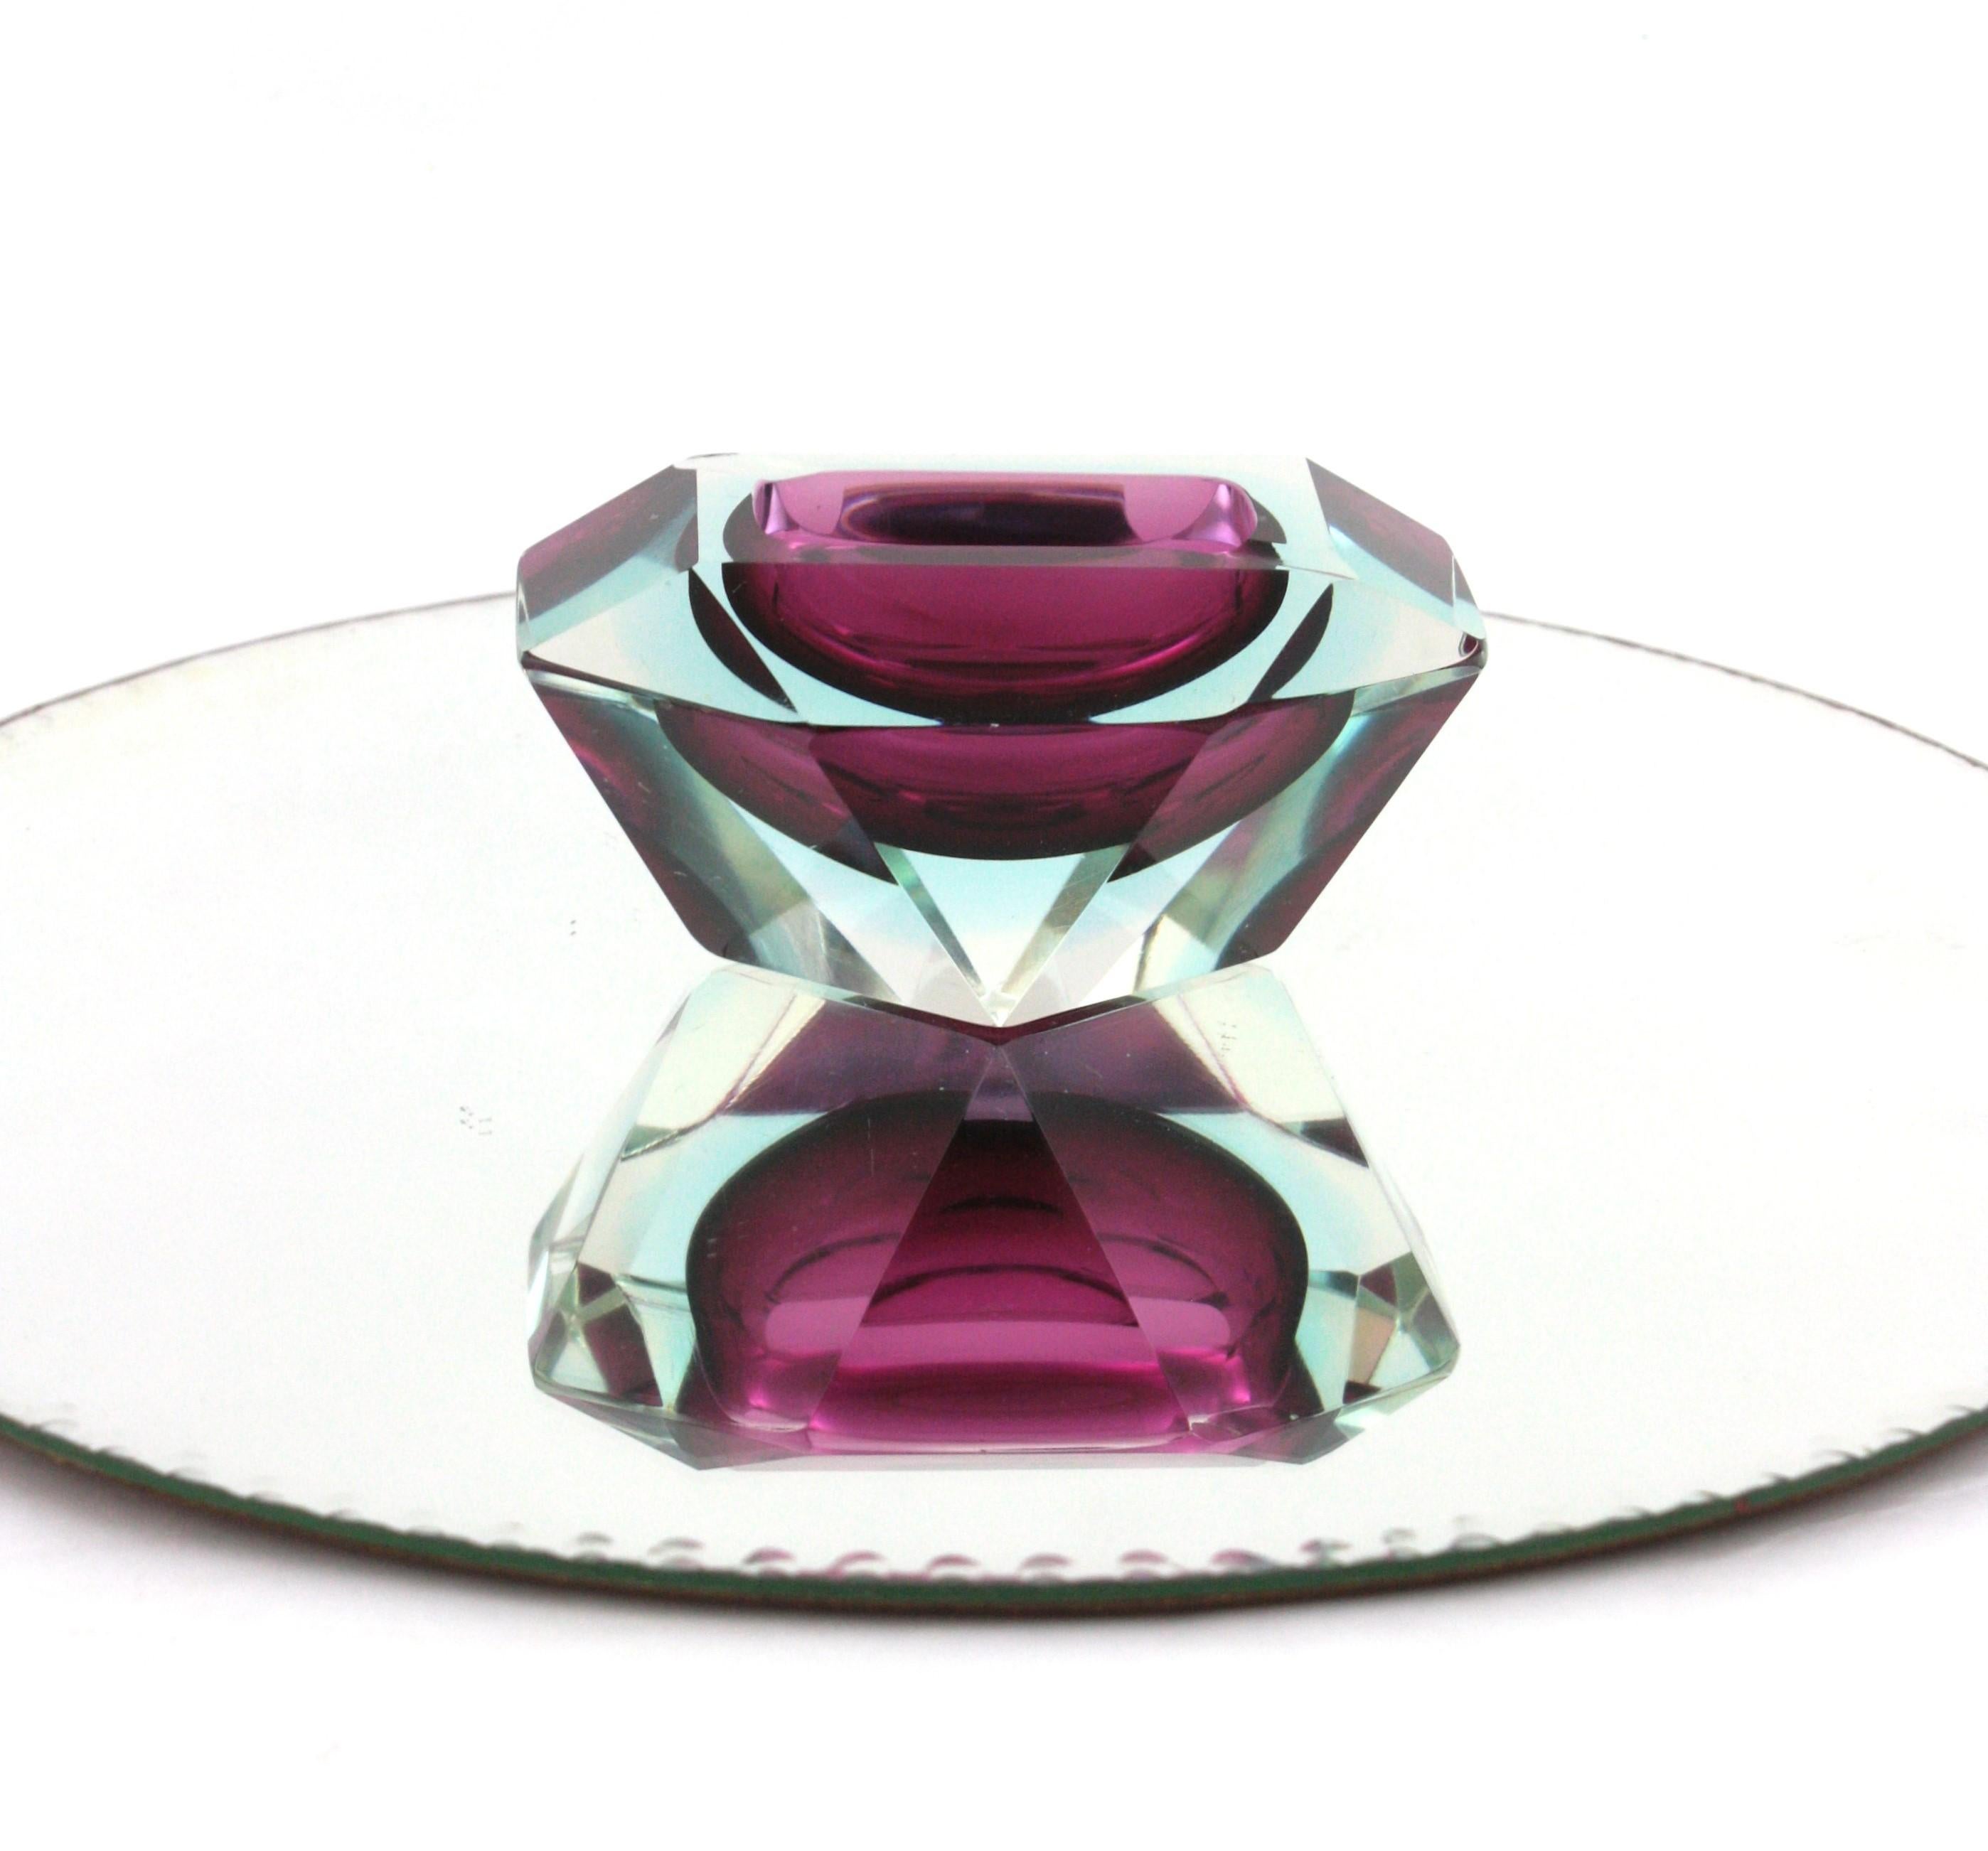 Mid-Century Modern Flavio Poli for Seguso Vetri d'Arte multi faceted purple and soft blue Murano glass Sommerso bowl, Italy, 1960s.
This hand blown glass bowl is made of purple glass and a layer of blue glass, submerged into clear glass. Designed